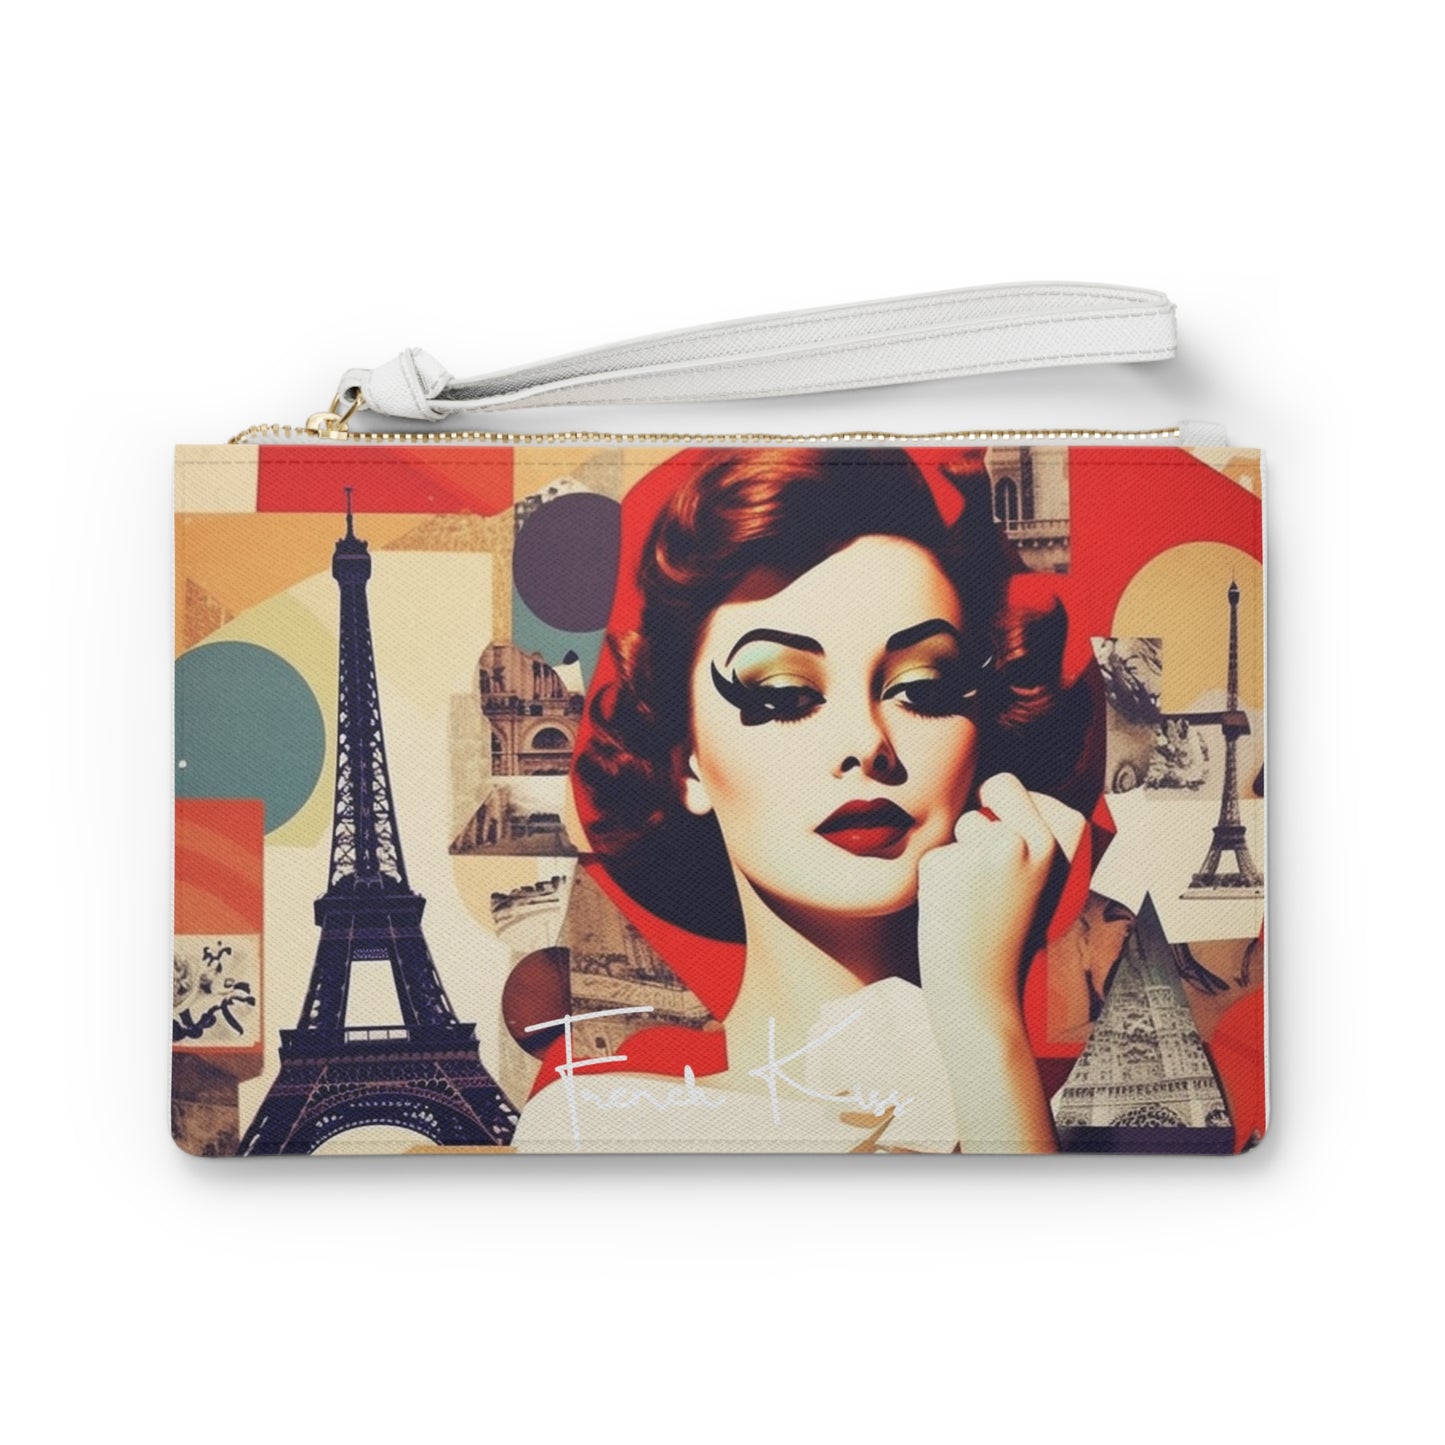 PARIS AMOUR French Kiss Pop Art, Sexy, Sassy CLUTCH Bag, France Couture, Travel, Fashion, Luxury, Chic French designer, must have gift item